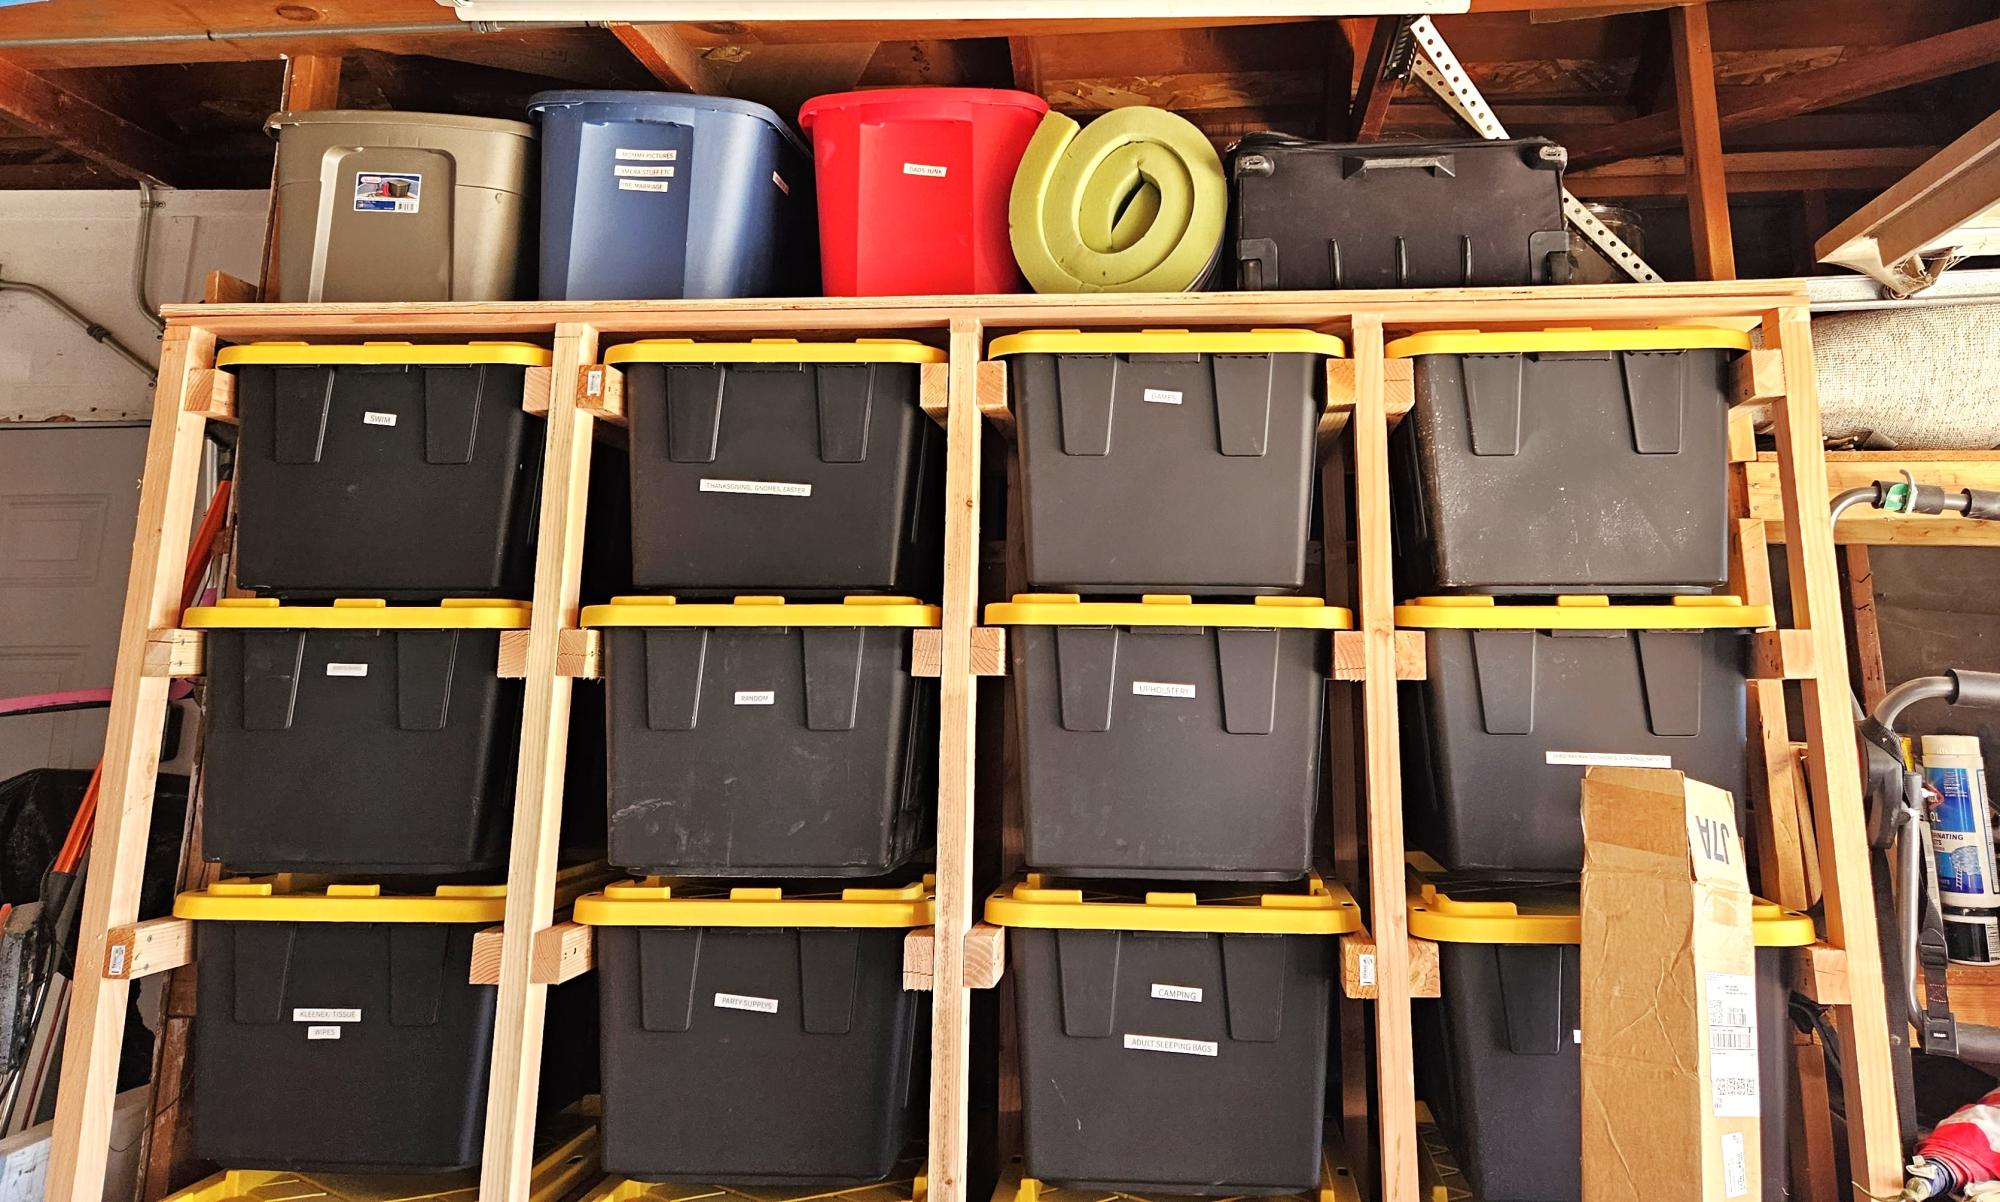 DIY Tote Rack Plans for the Member's Mark 27-gallon bins sold by